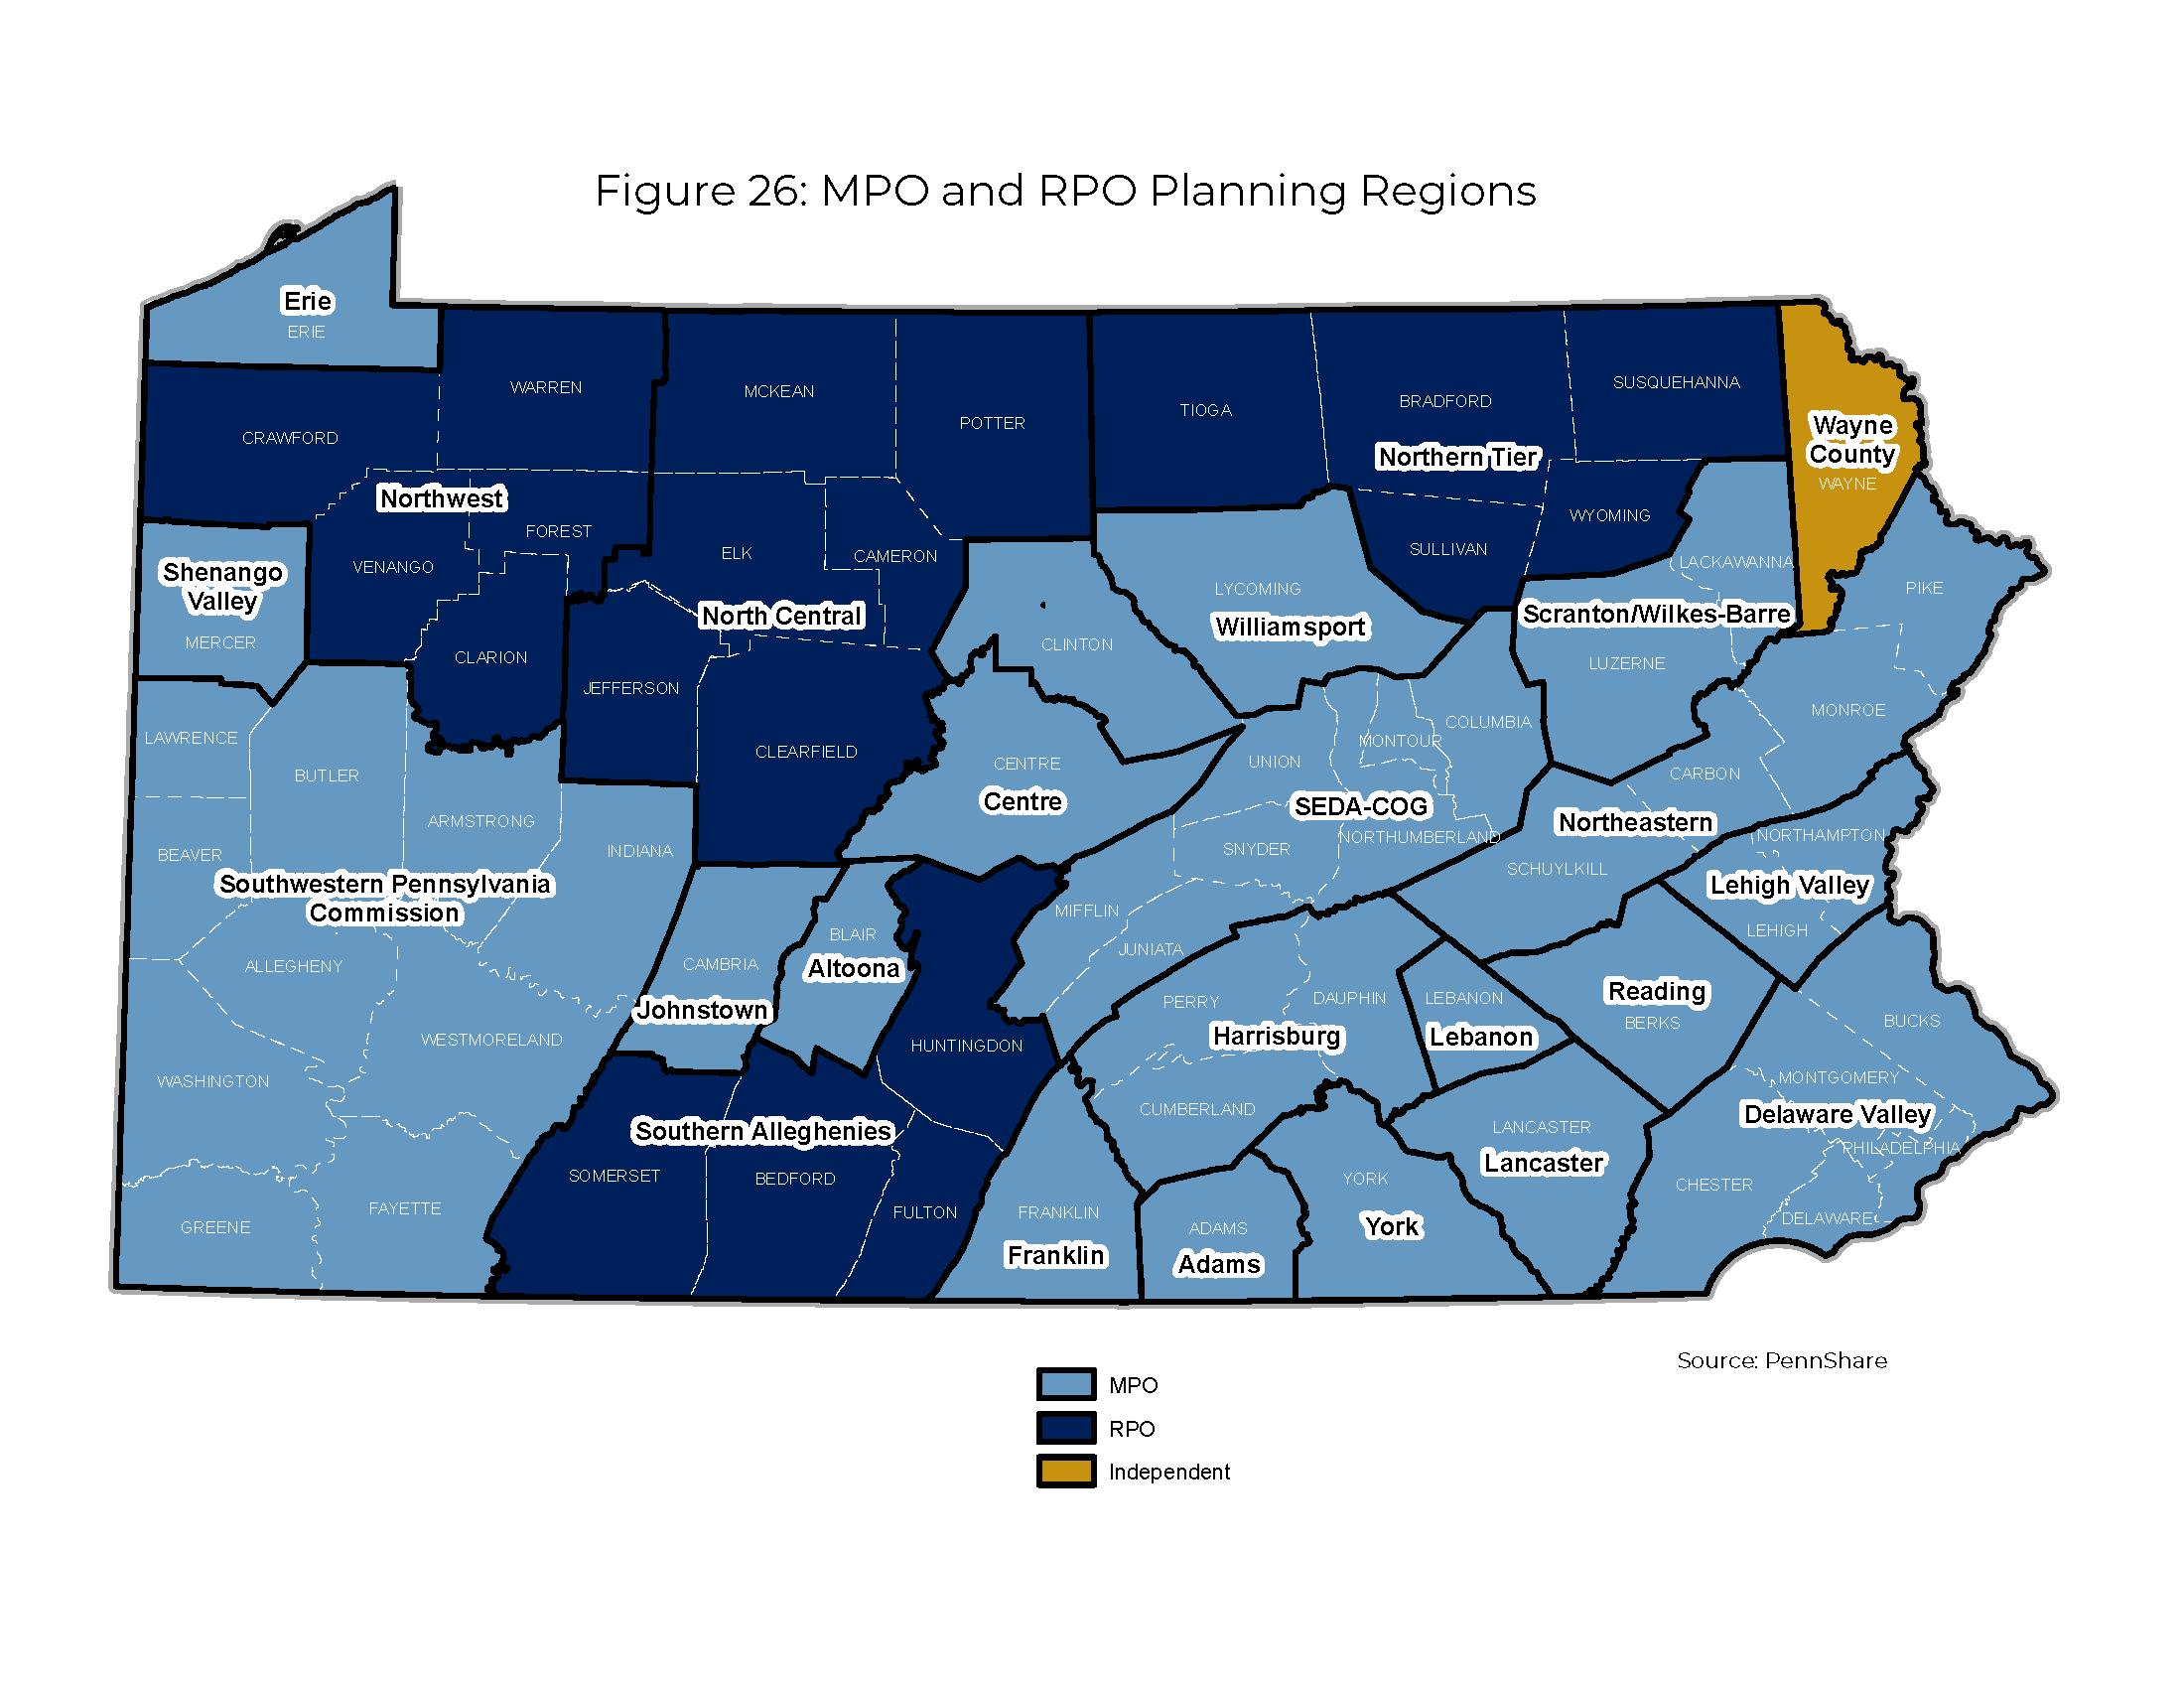 Figure 26 is a state map of Pennsylvania illustrating the MPO and RPO planning regions and the independent county, Wayne County. 